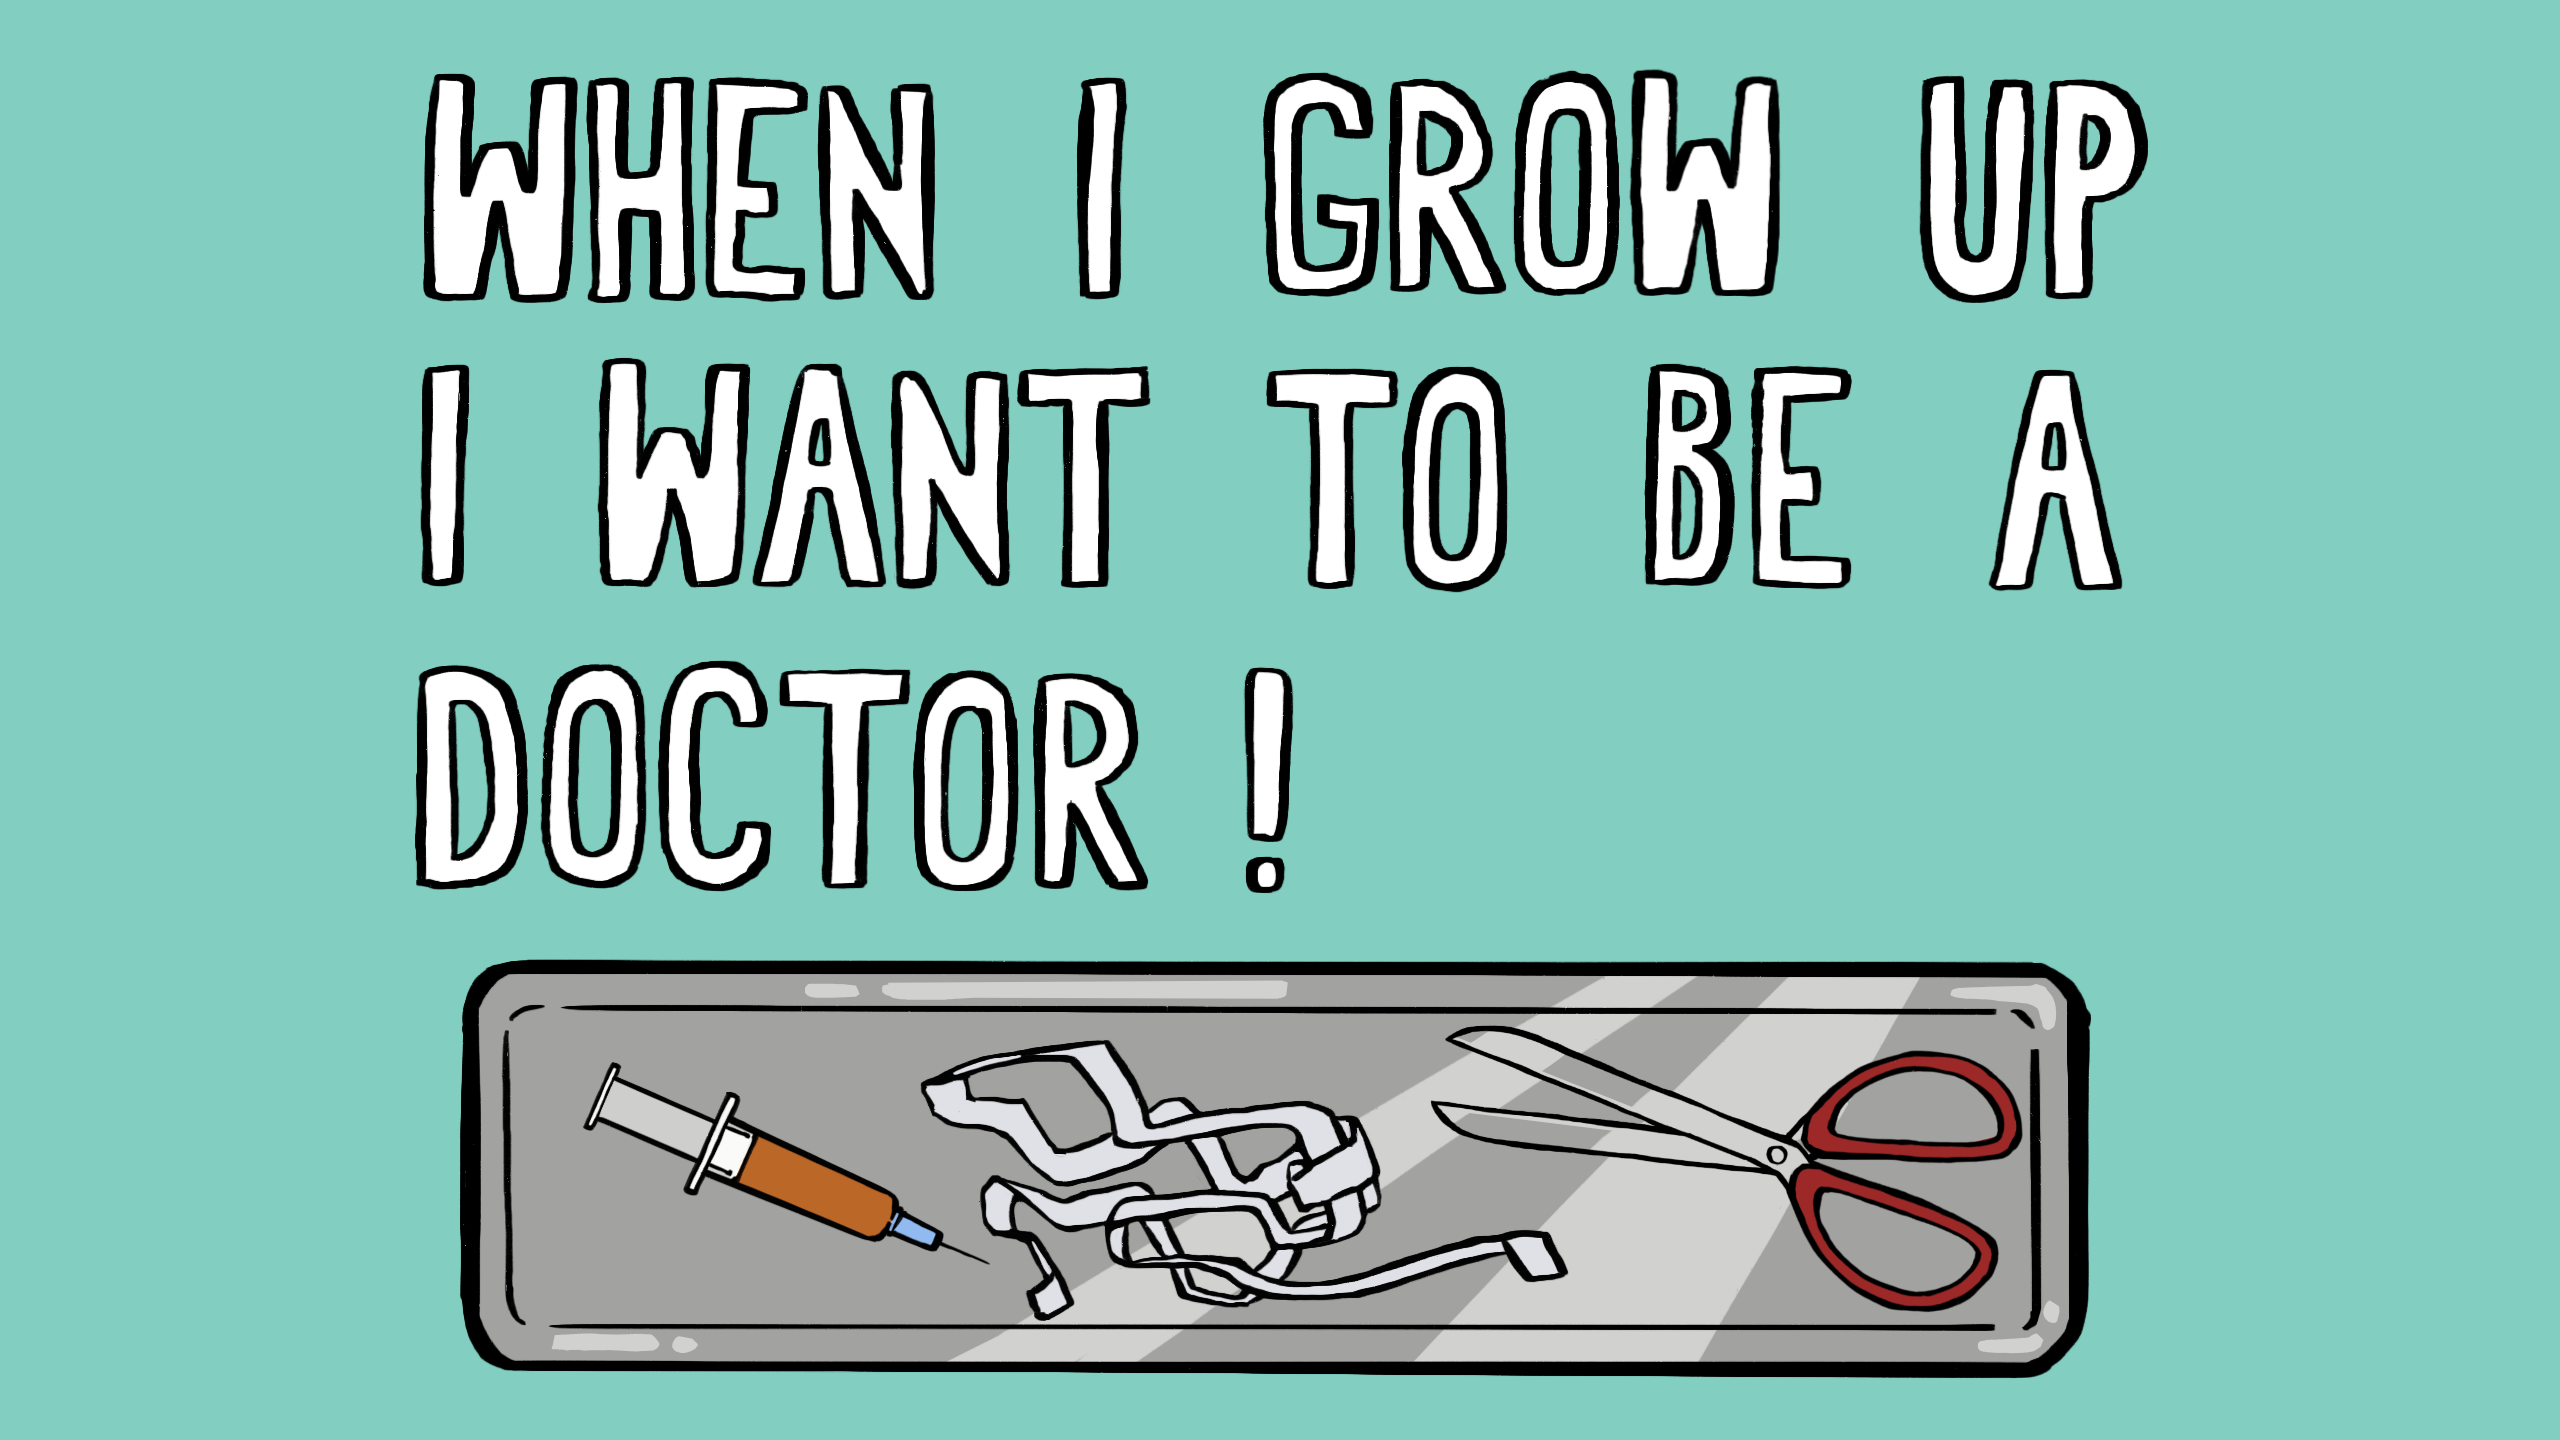 When I grow up I want to be a doctor!